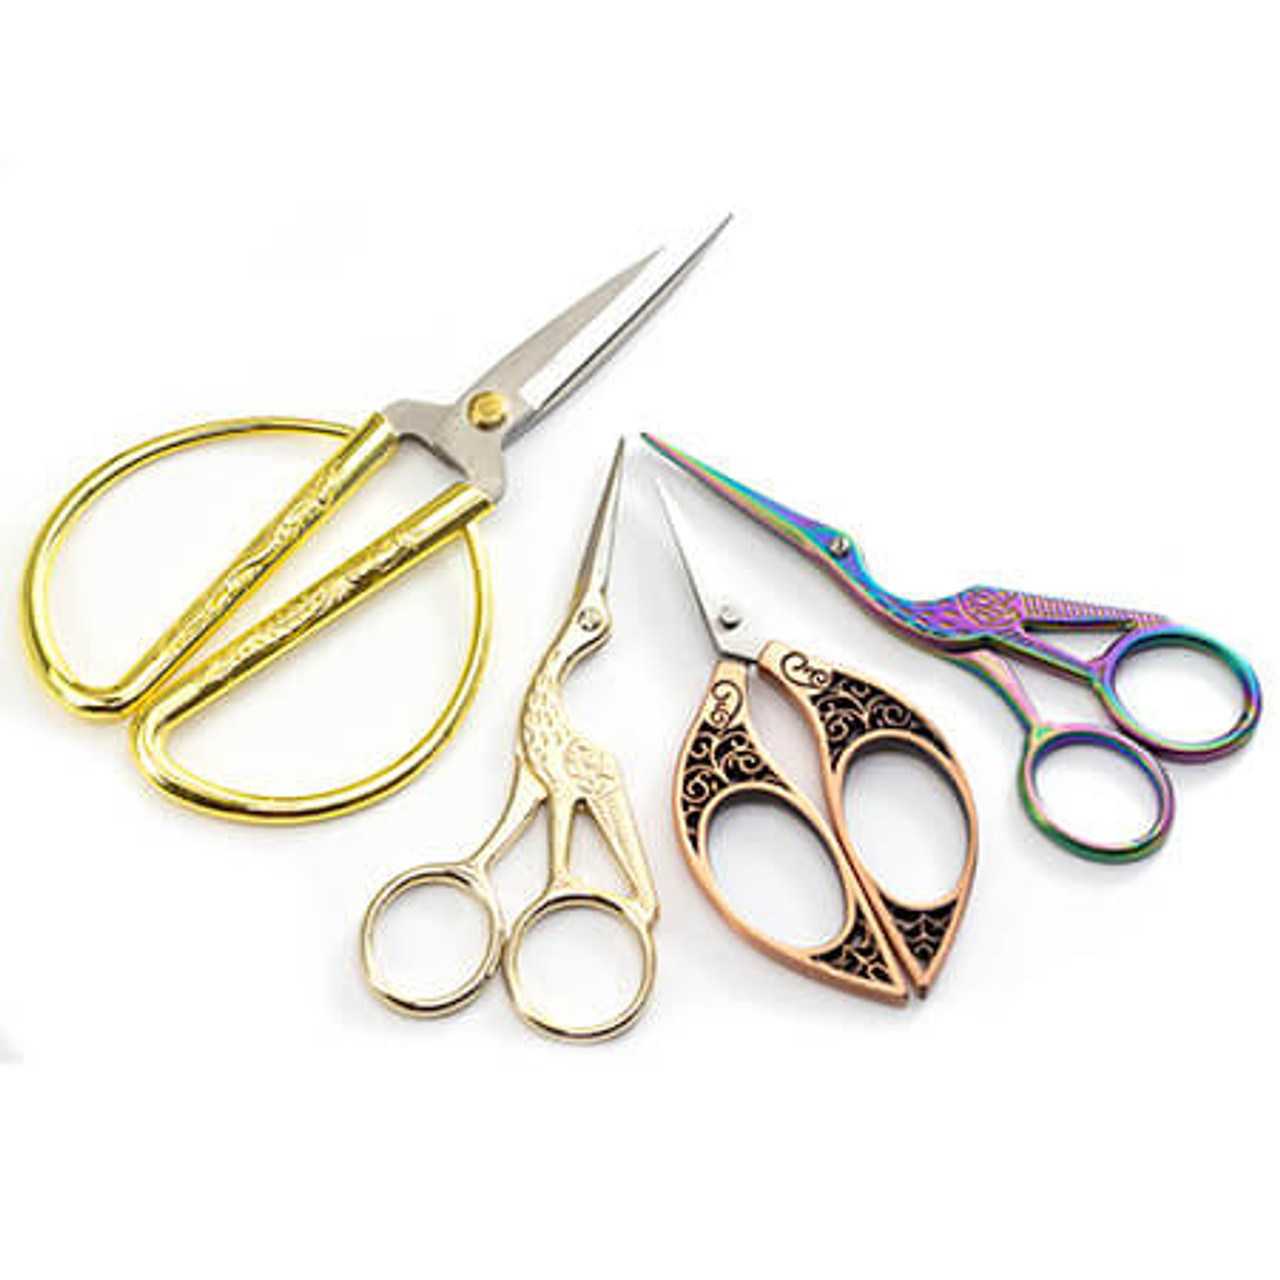 Antique Style Copper Embroidery Scissors, Small Pretty Scissors for Sewing  Kit, Gift for Cross Stitch Friend, Quilting & Needlework Supplies 